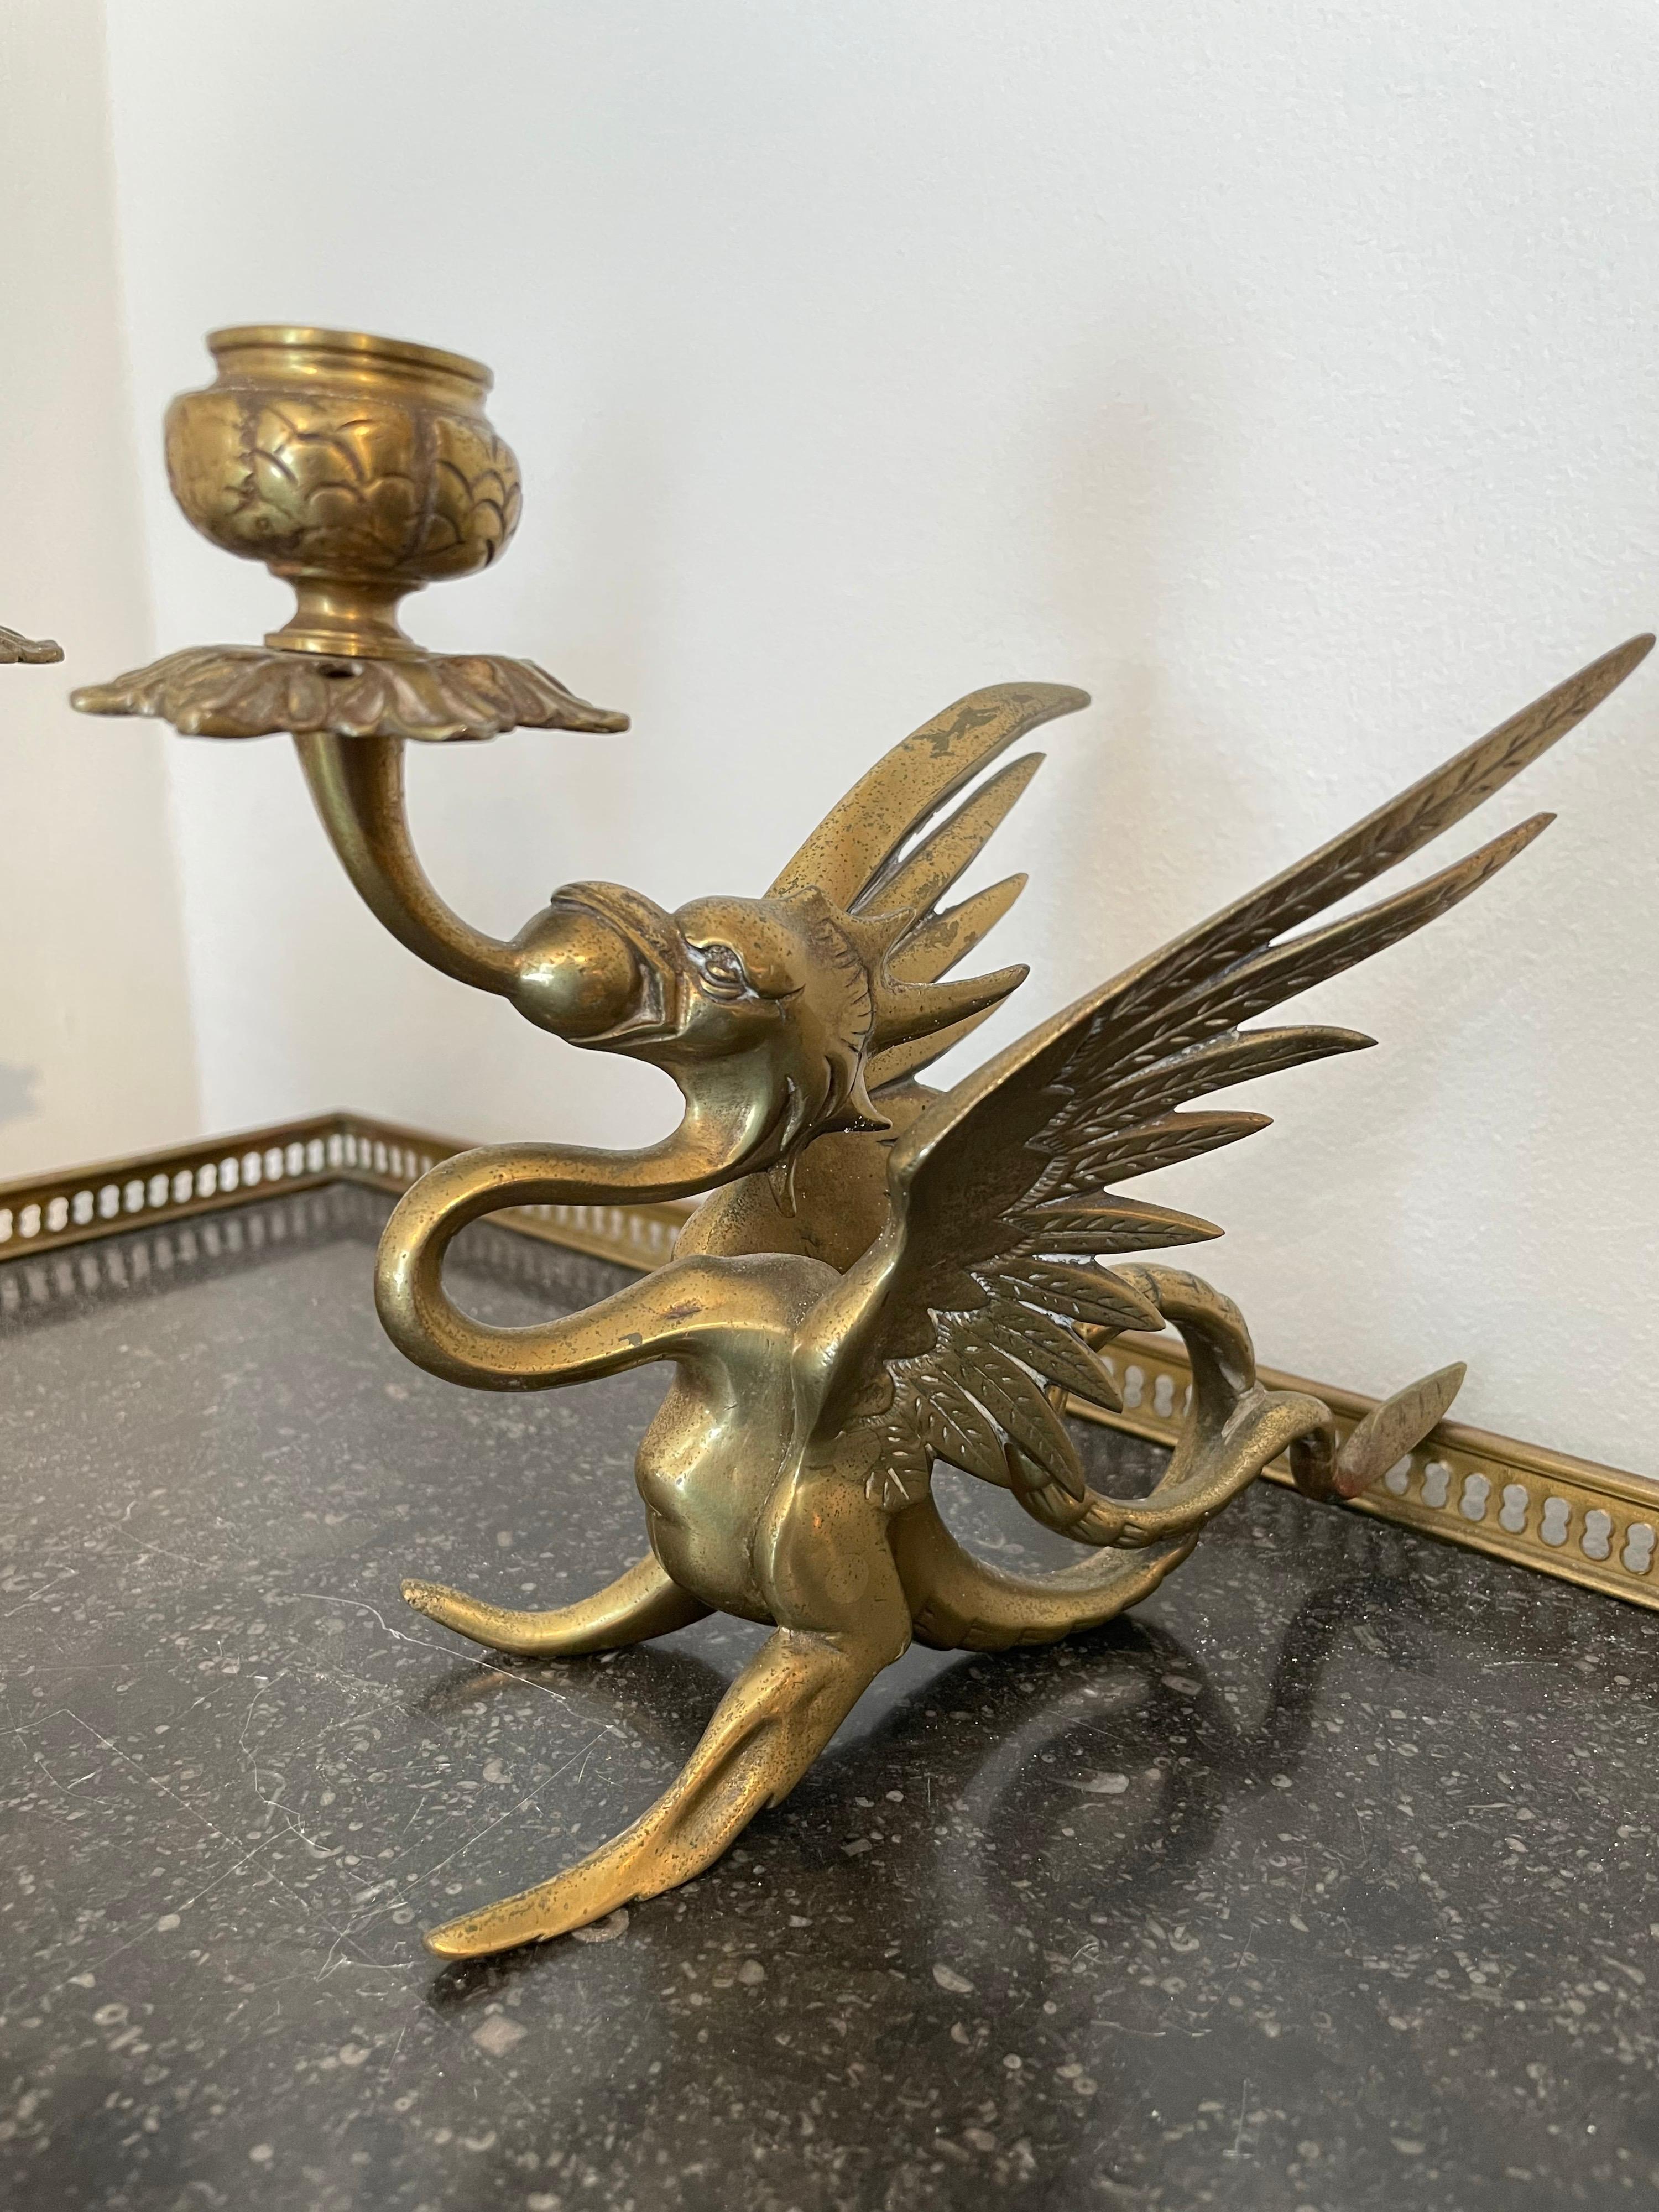 Pair of vintage brass Griffin candlesticks made by Tiffany & Co.